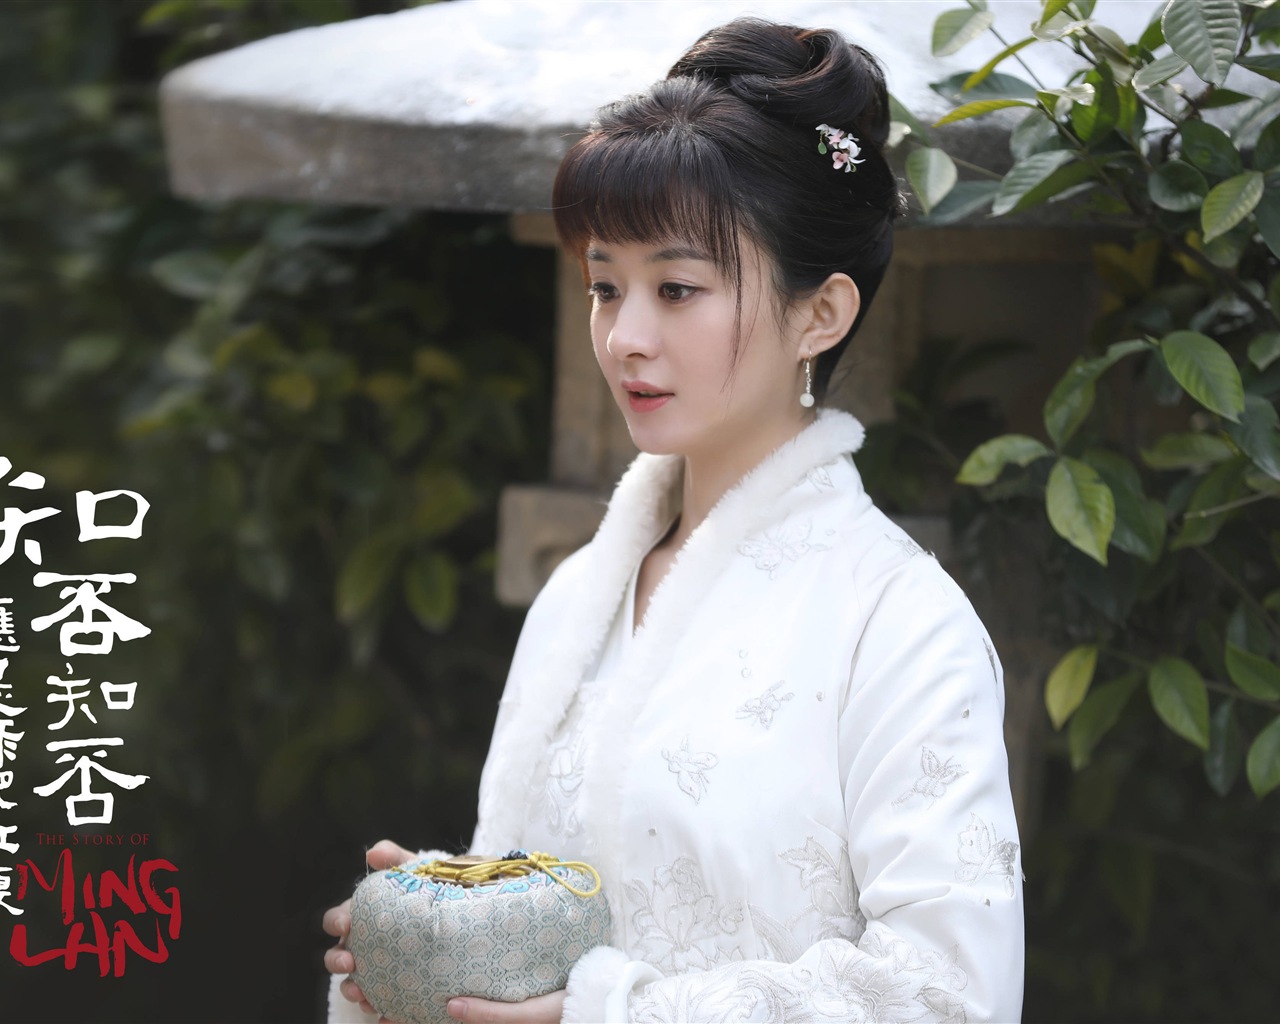 The Story Of MingLan, TV series HD wallpapers #51 - 1280x1024